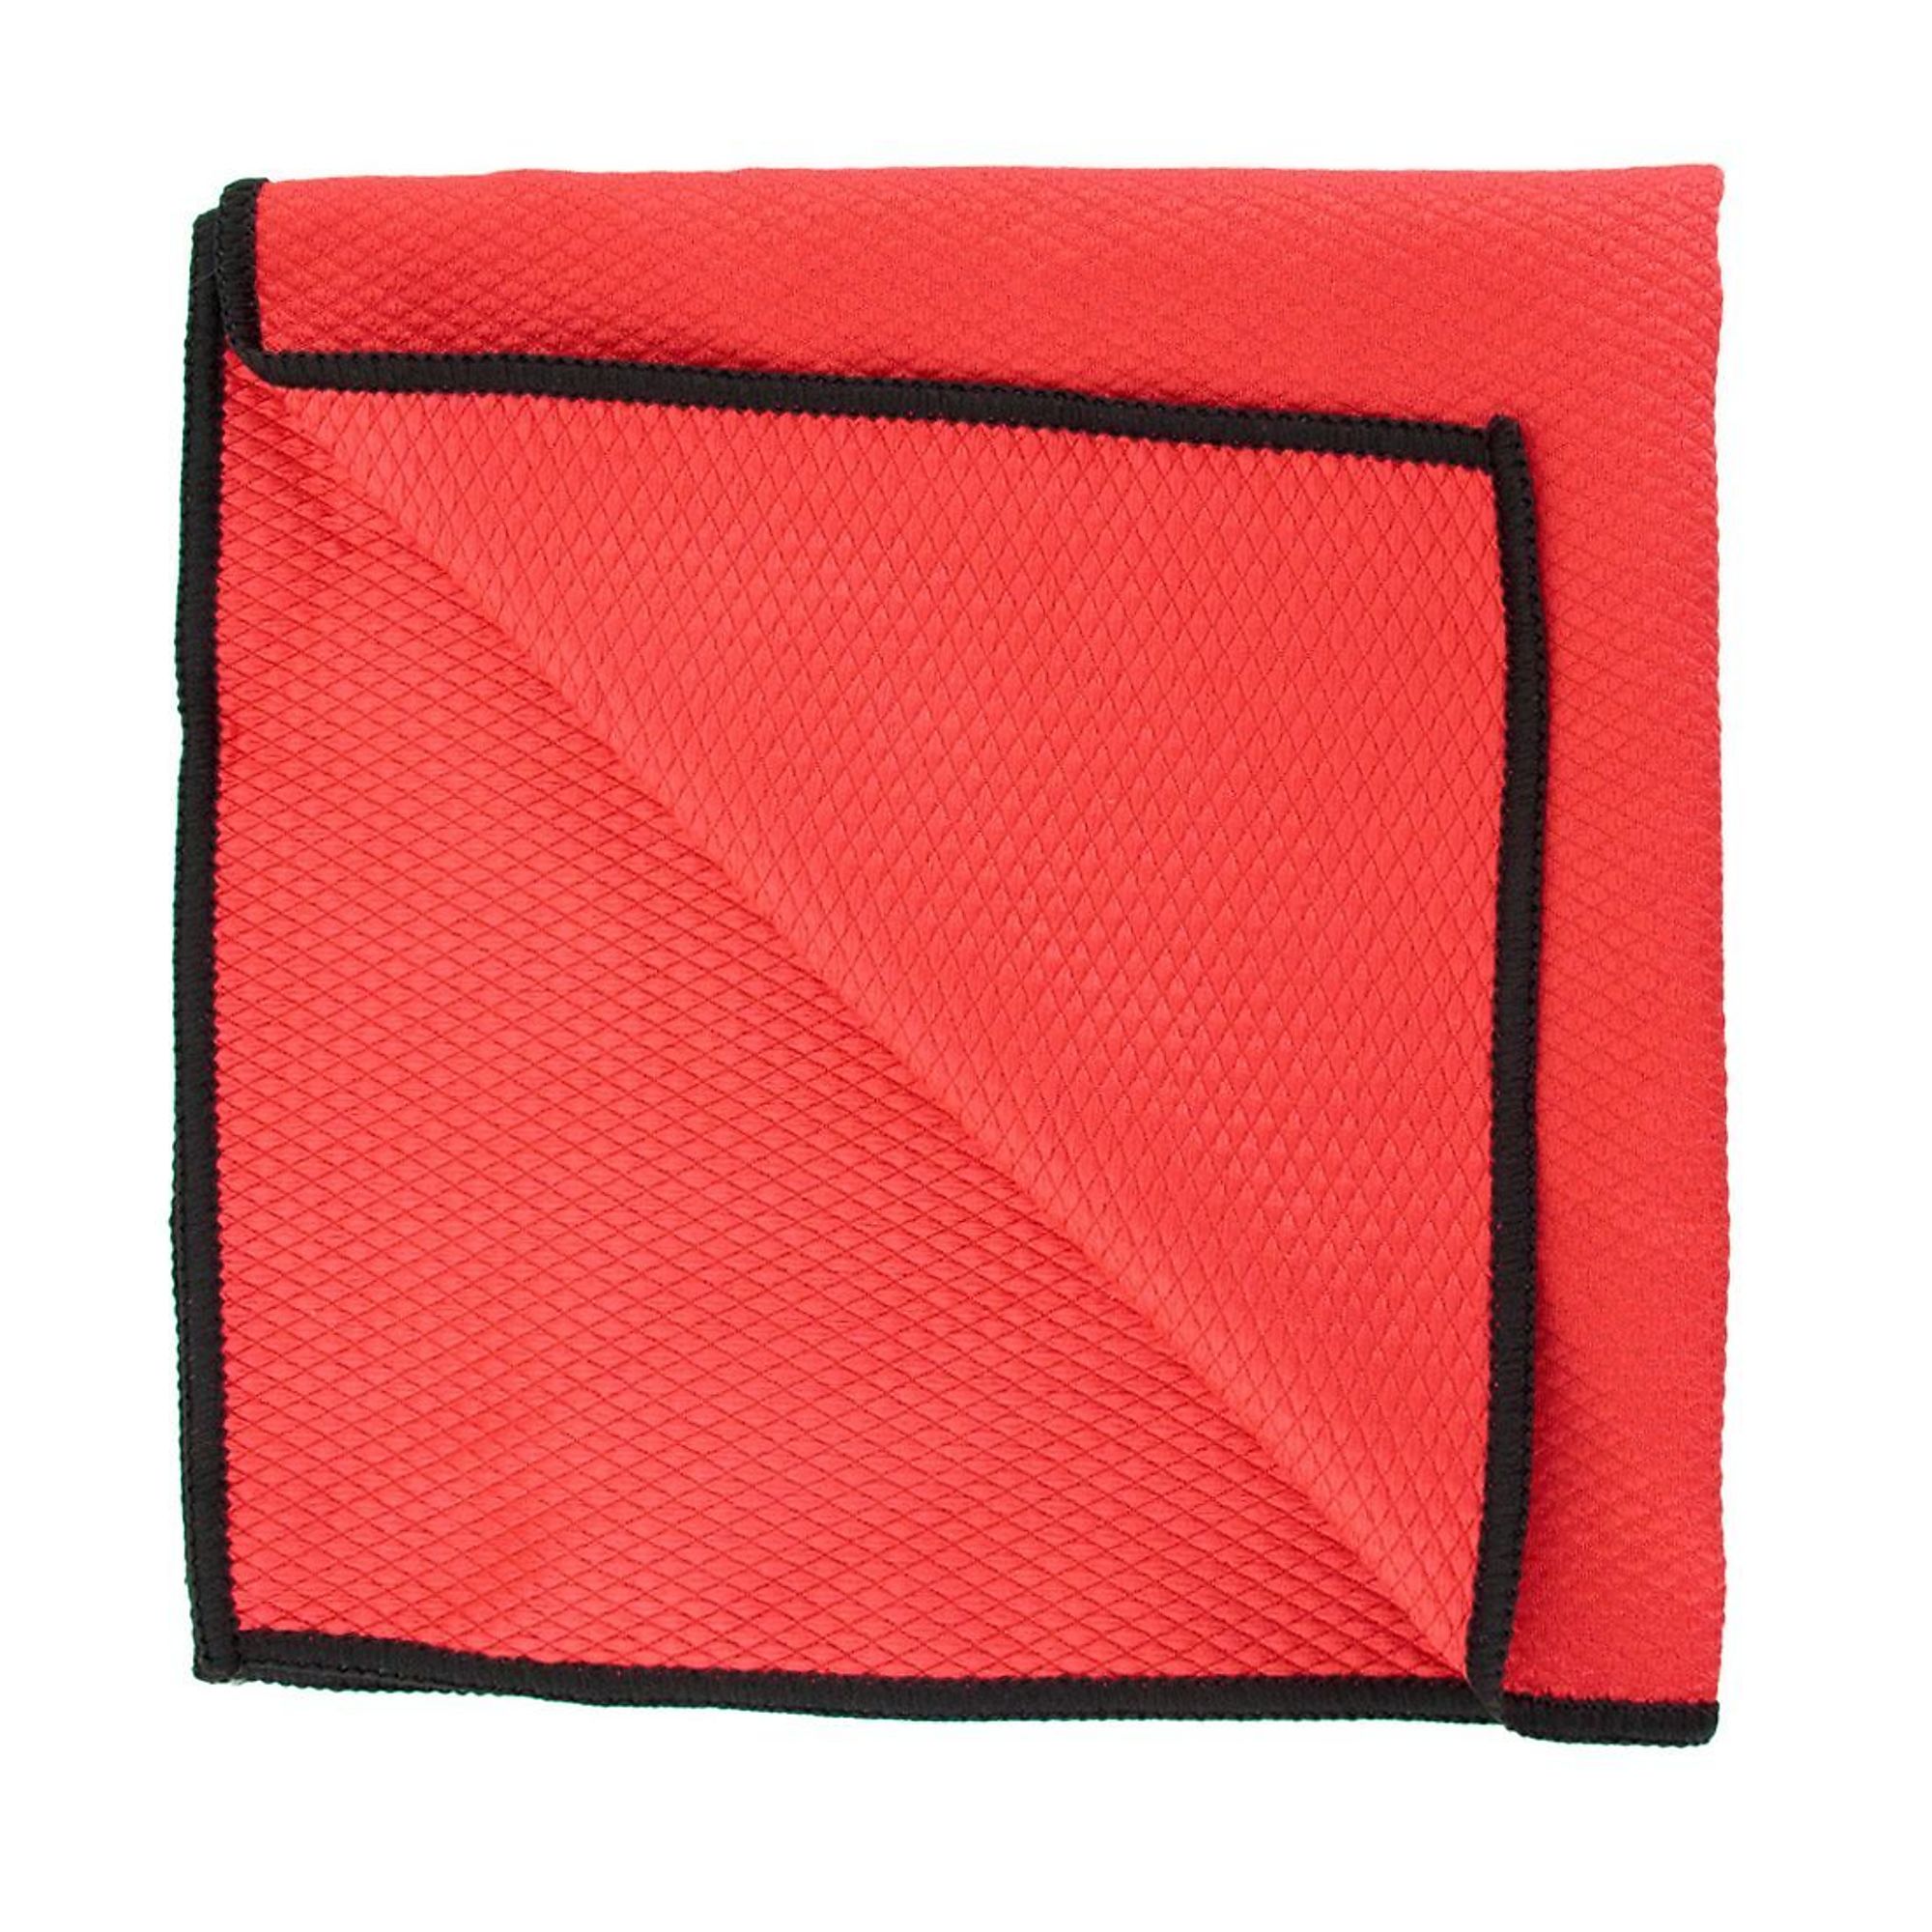 Xero Fish Scale Towel XL Ruby - Pack of Ten, Red